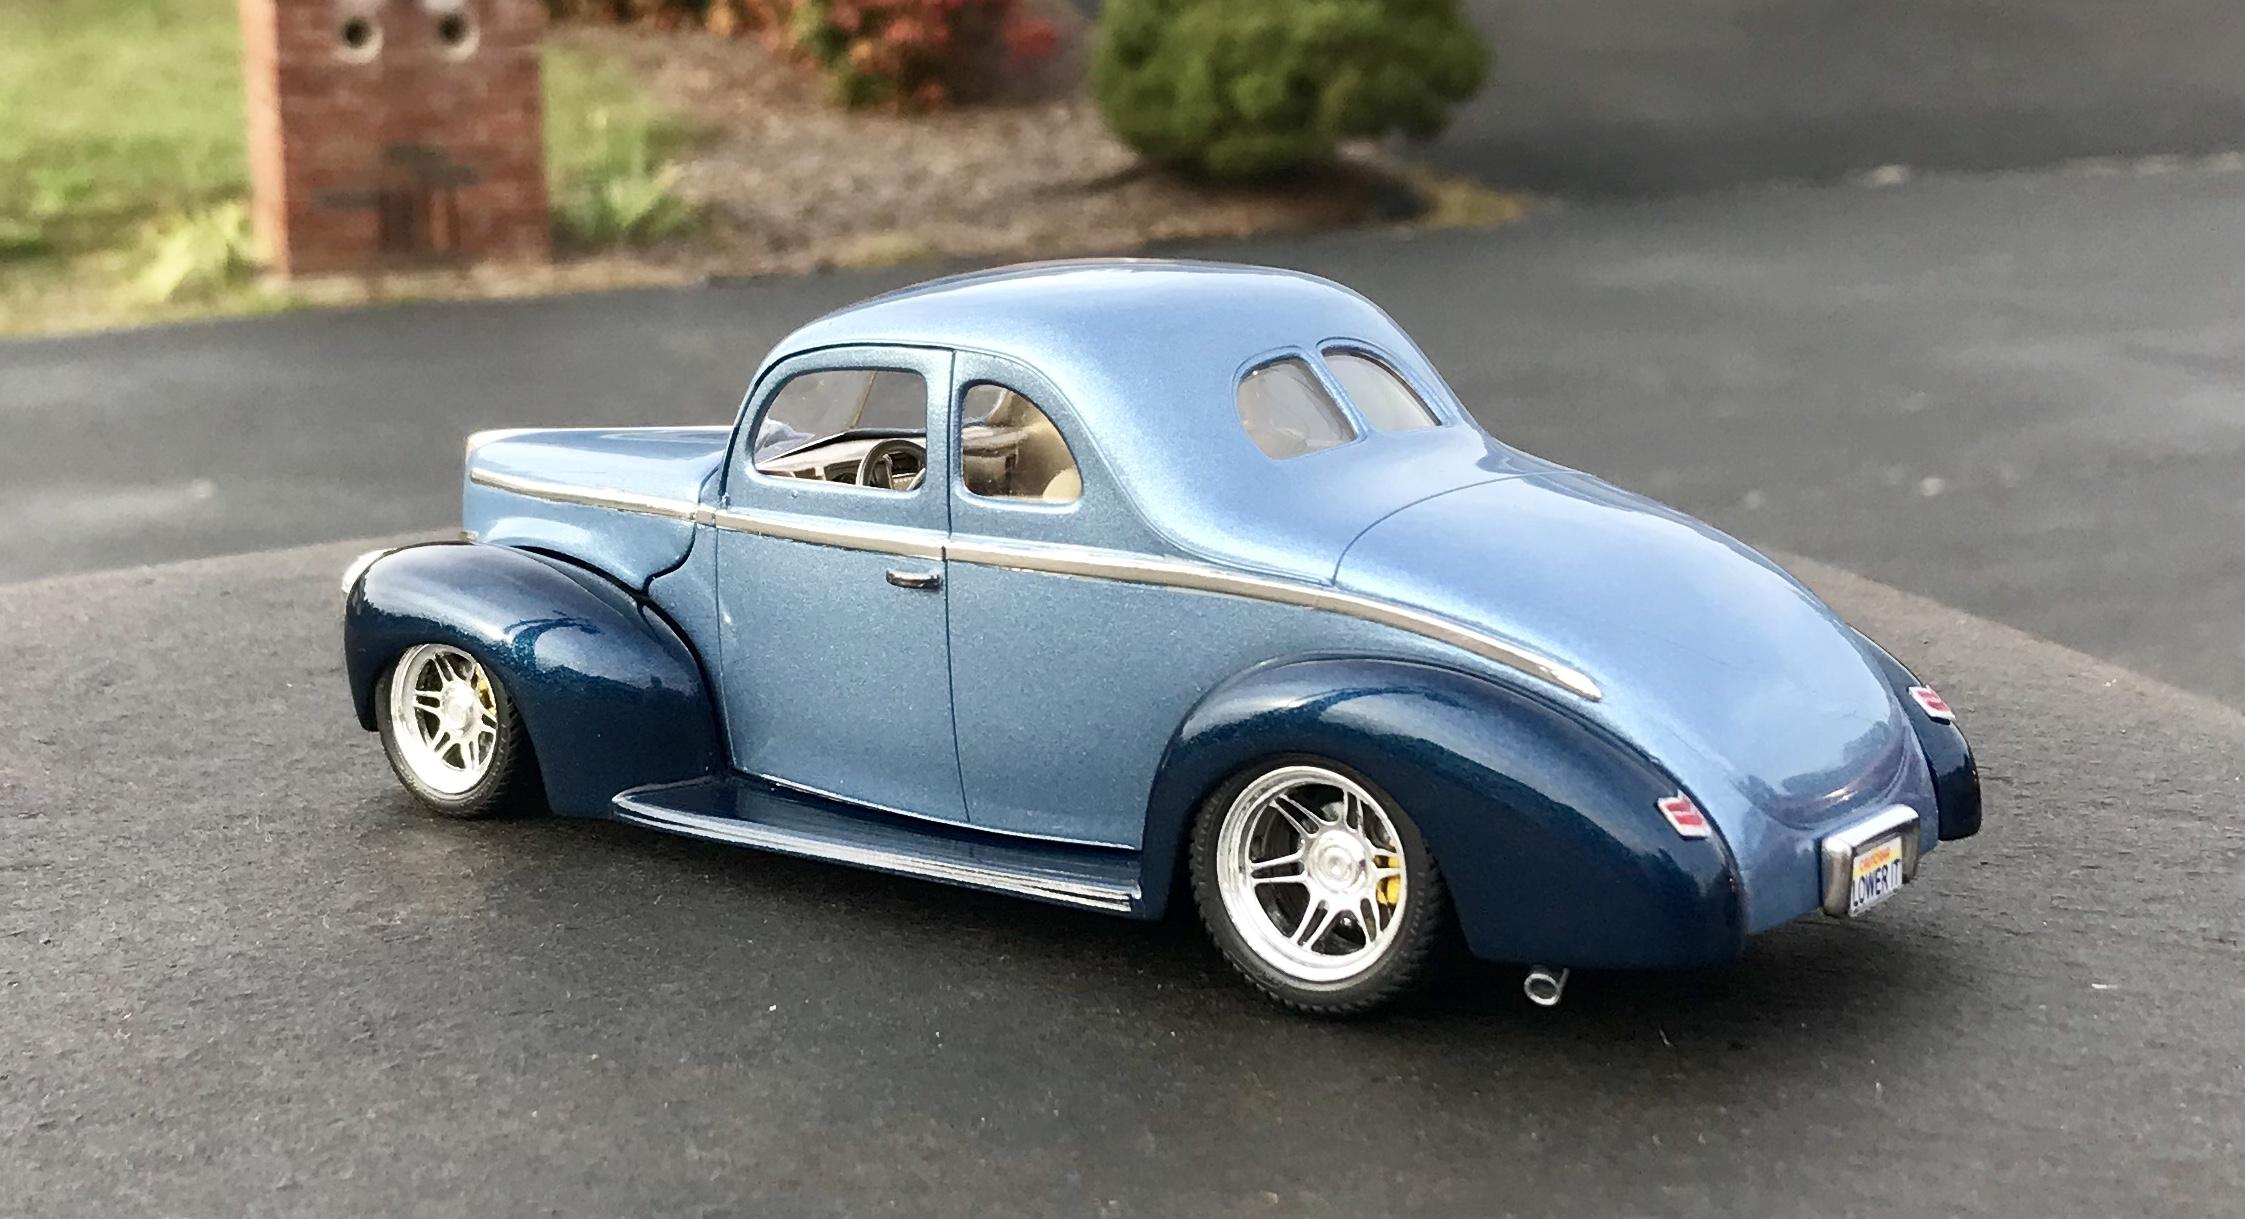 AMT 1940 Ford Coupe - Model Cars - Model Cars Magazine Forum